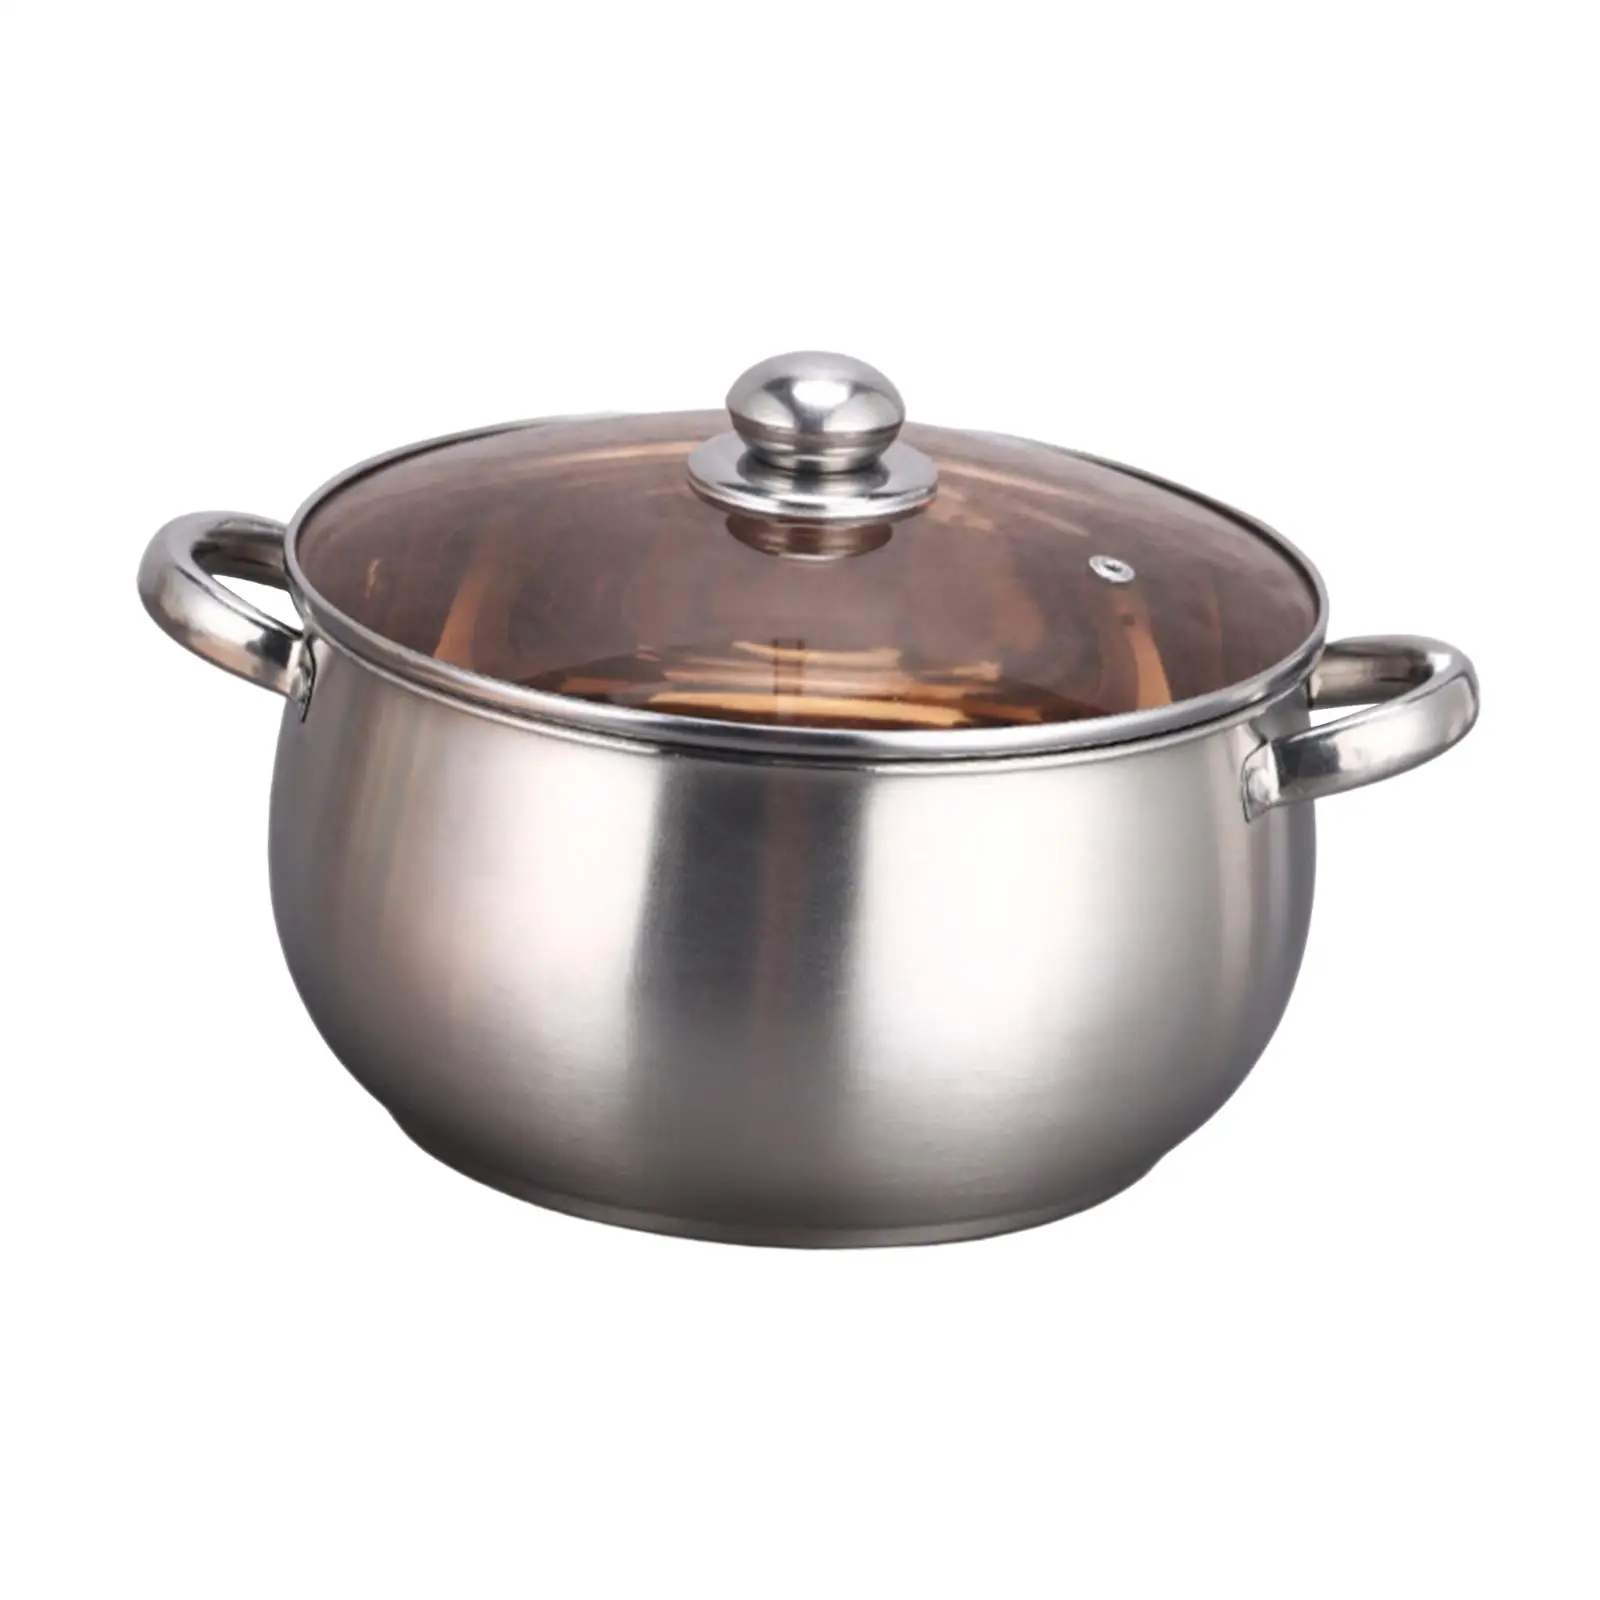 Stainless Steel Stockpot Suitable for All Stoves Dual Handle Kitchen Cooking Pot for Cooking Eggs Warming Milk Vegetables Sauce